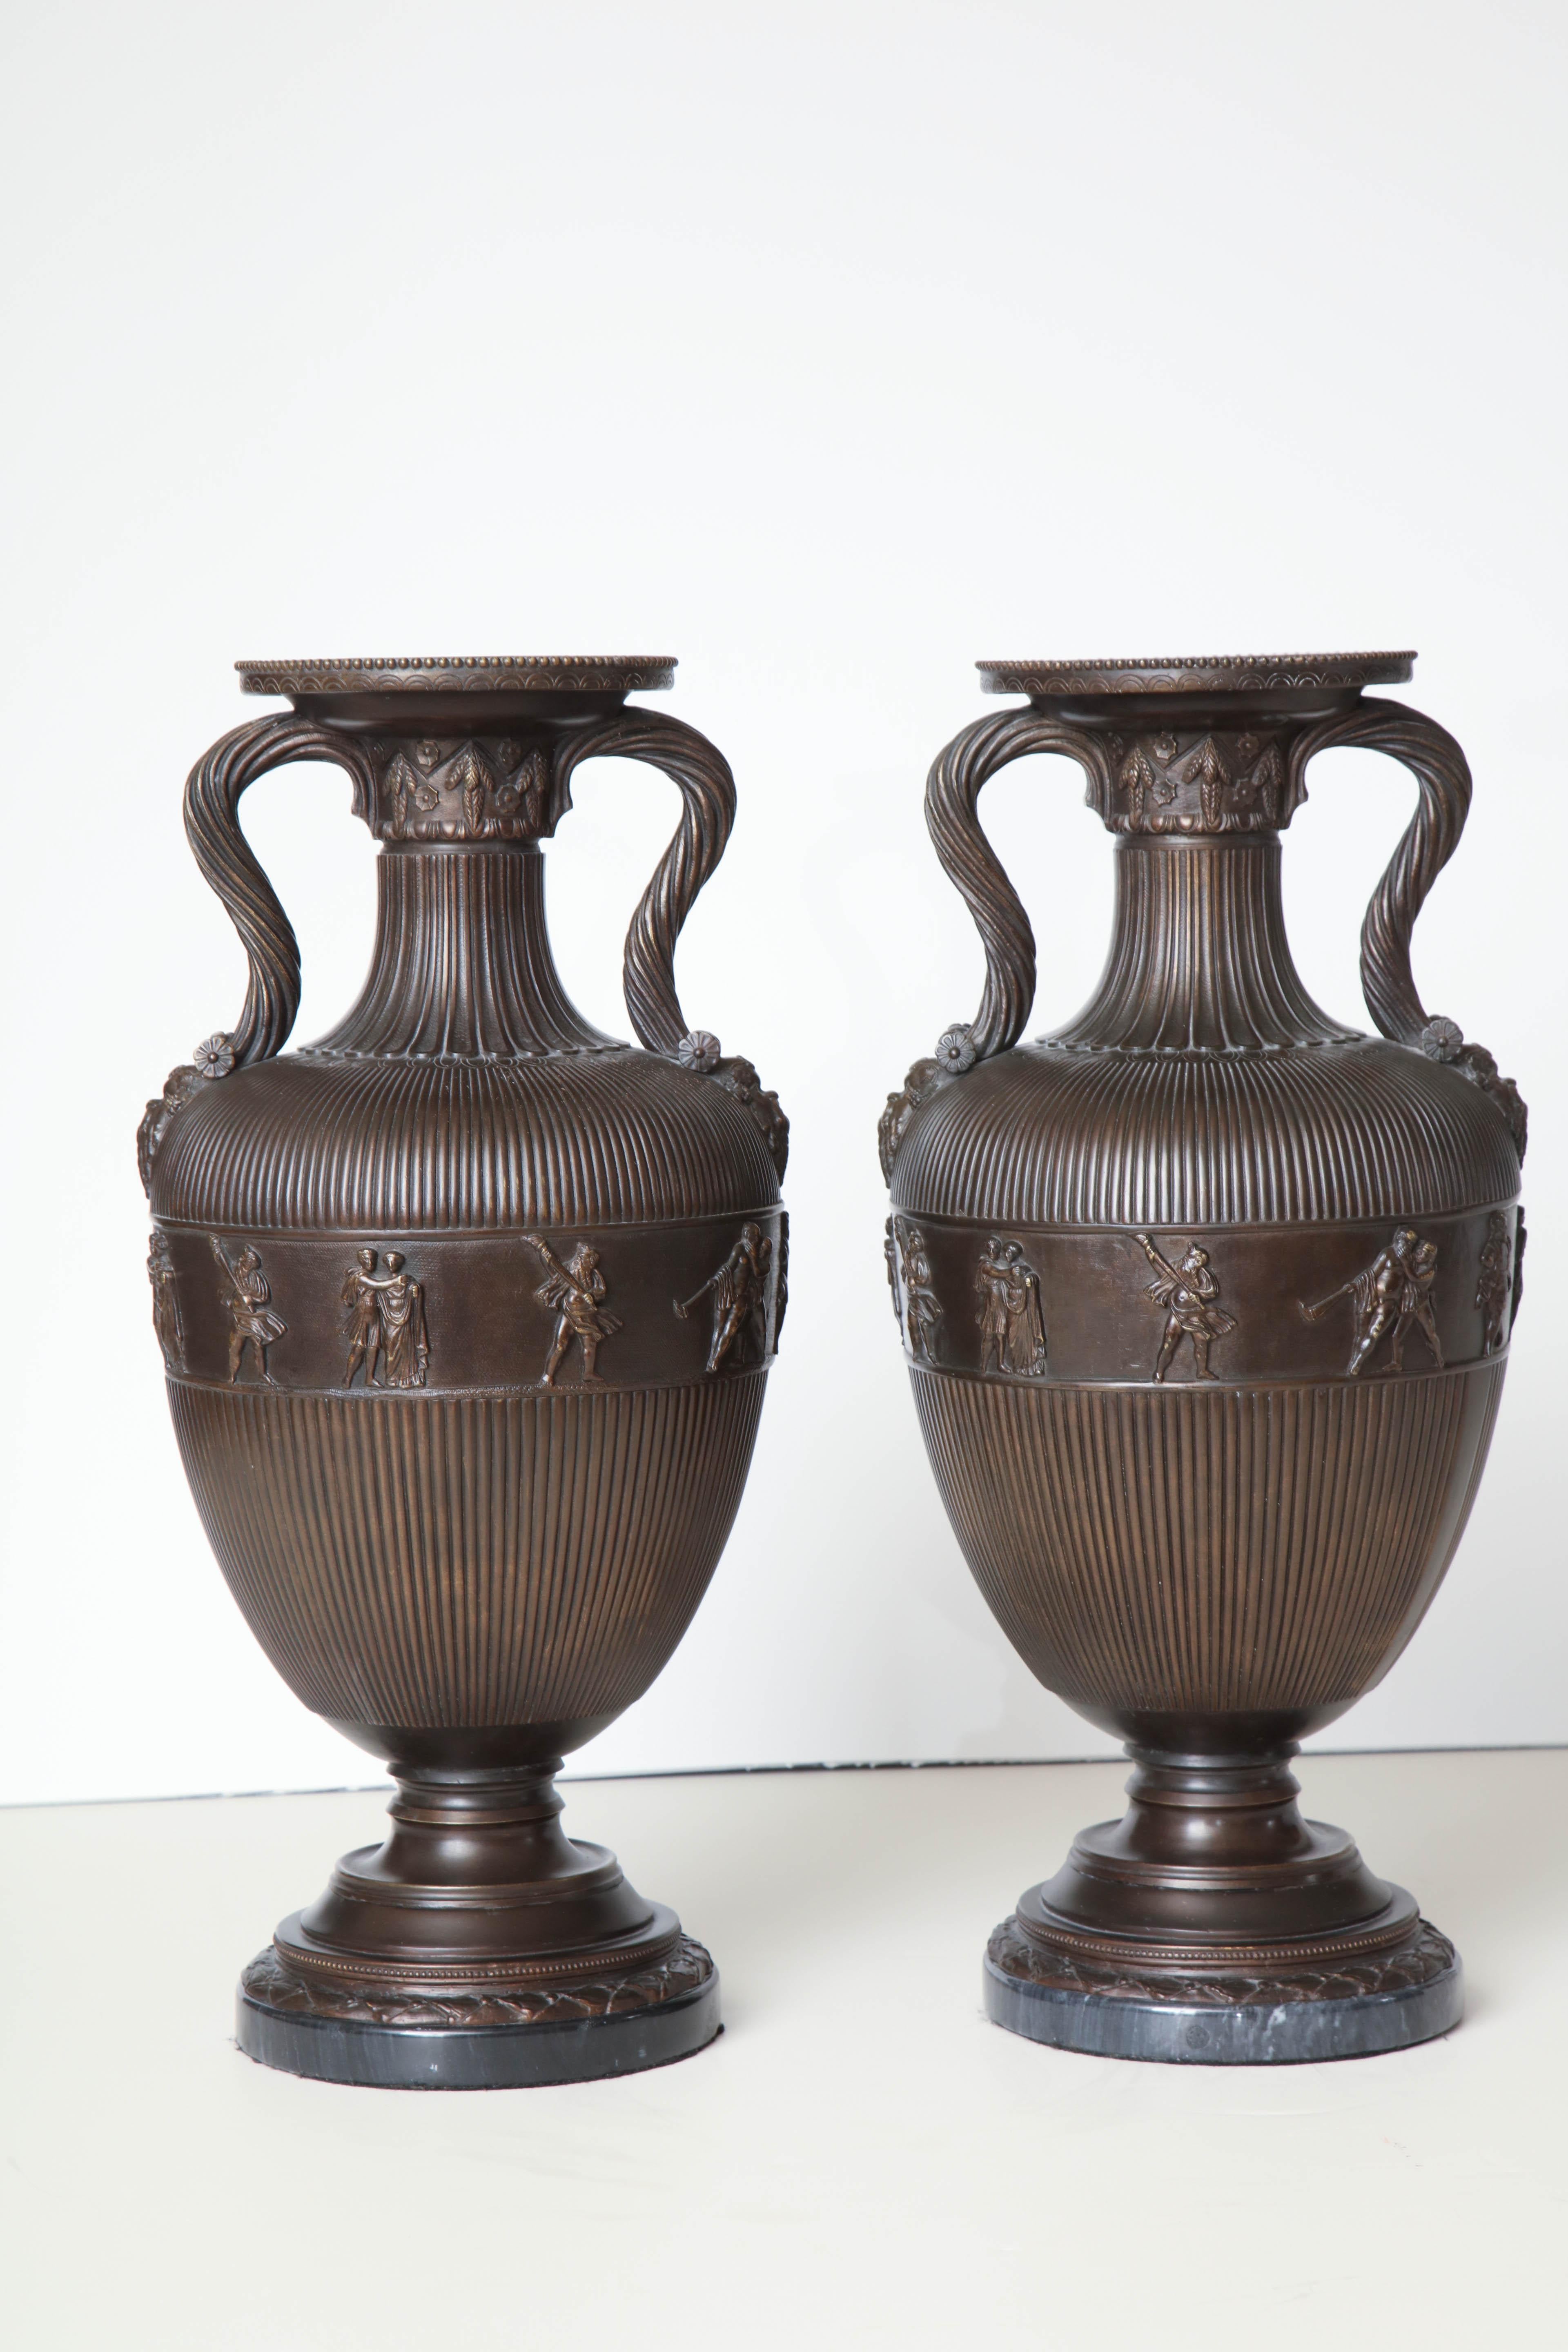 Superb pair of 19th century bronze urns, French, on marble bases.